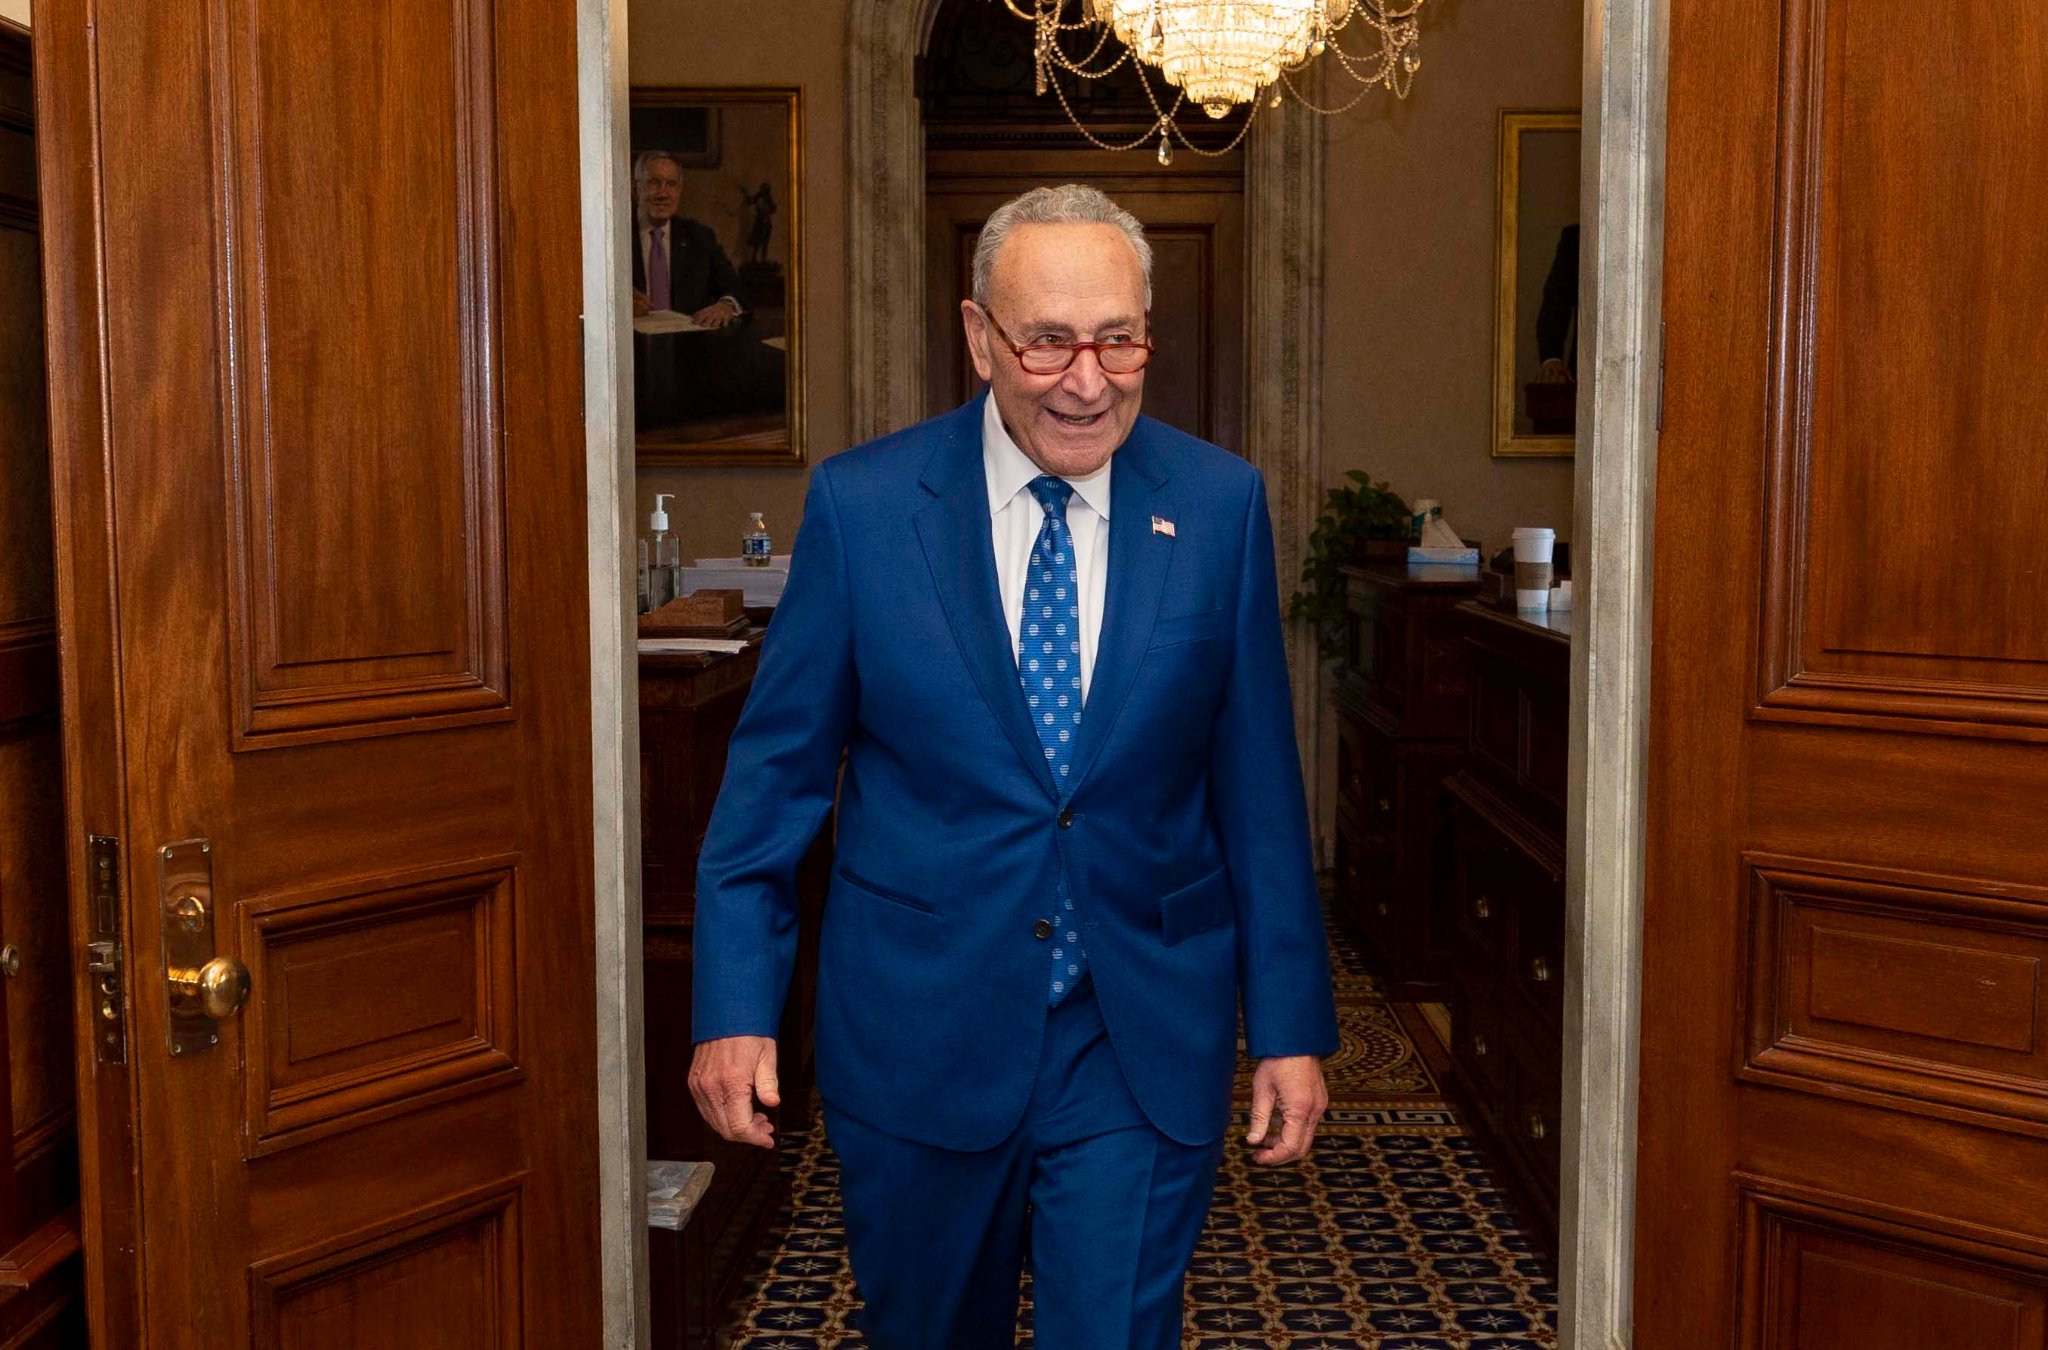 Senator Chuck Schumer following passage of the Inflation Reduction Act